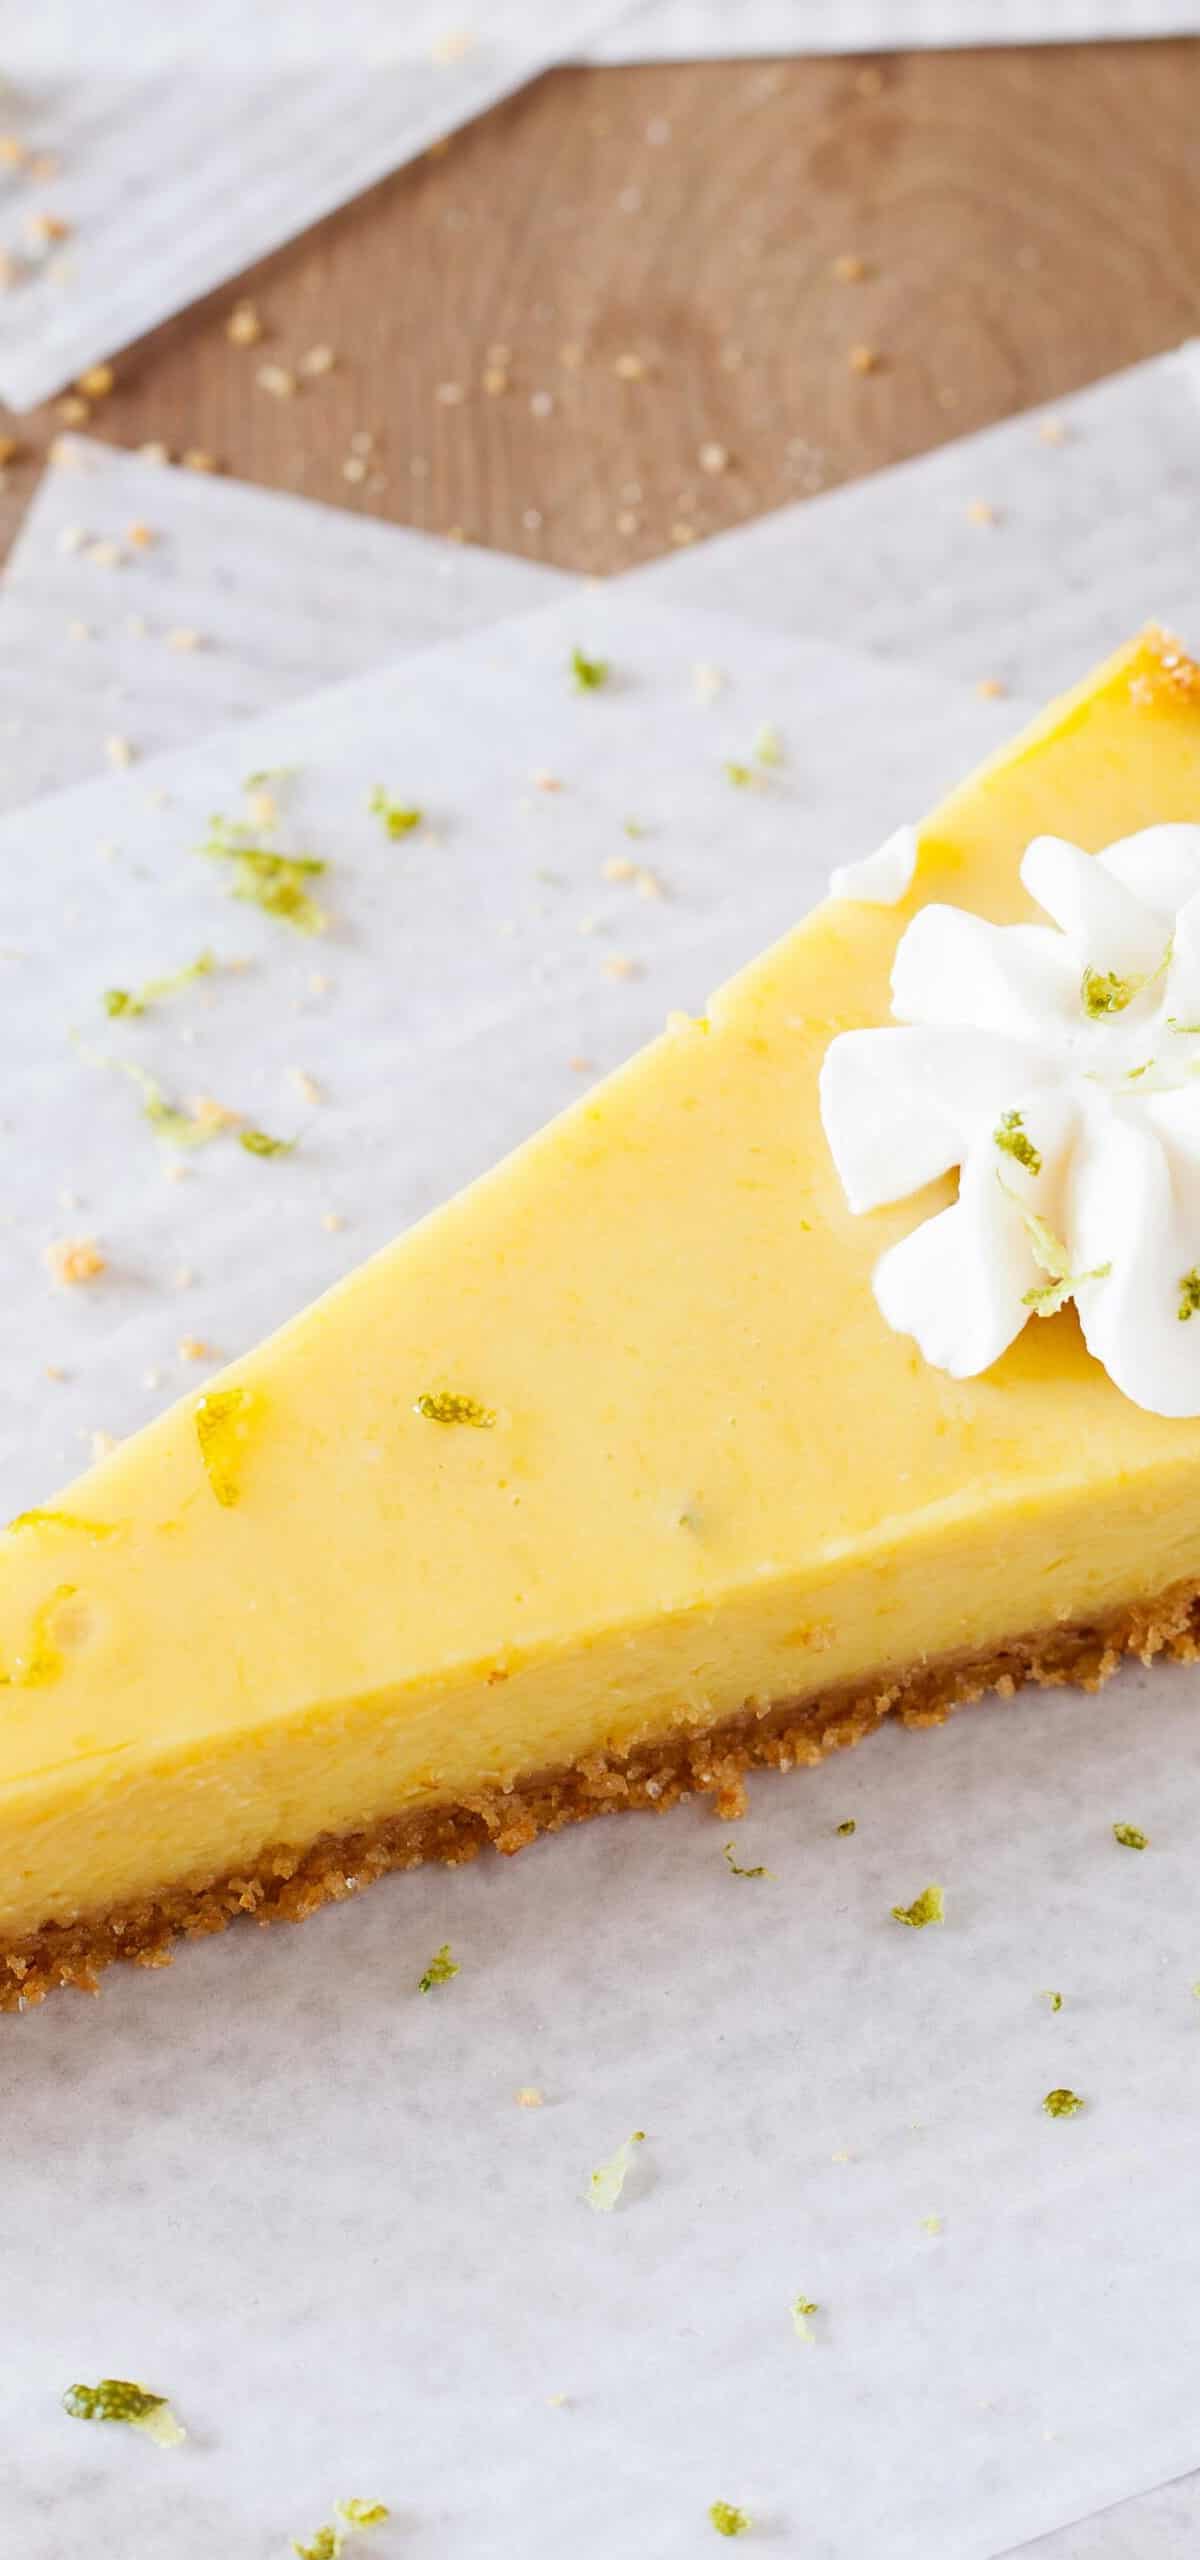  Perfectly creamy, tangy, and sweet all in one bite!